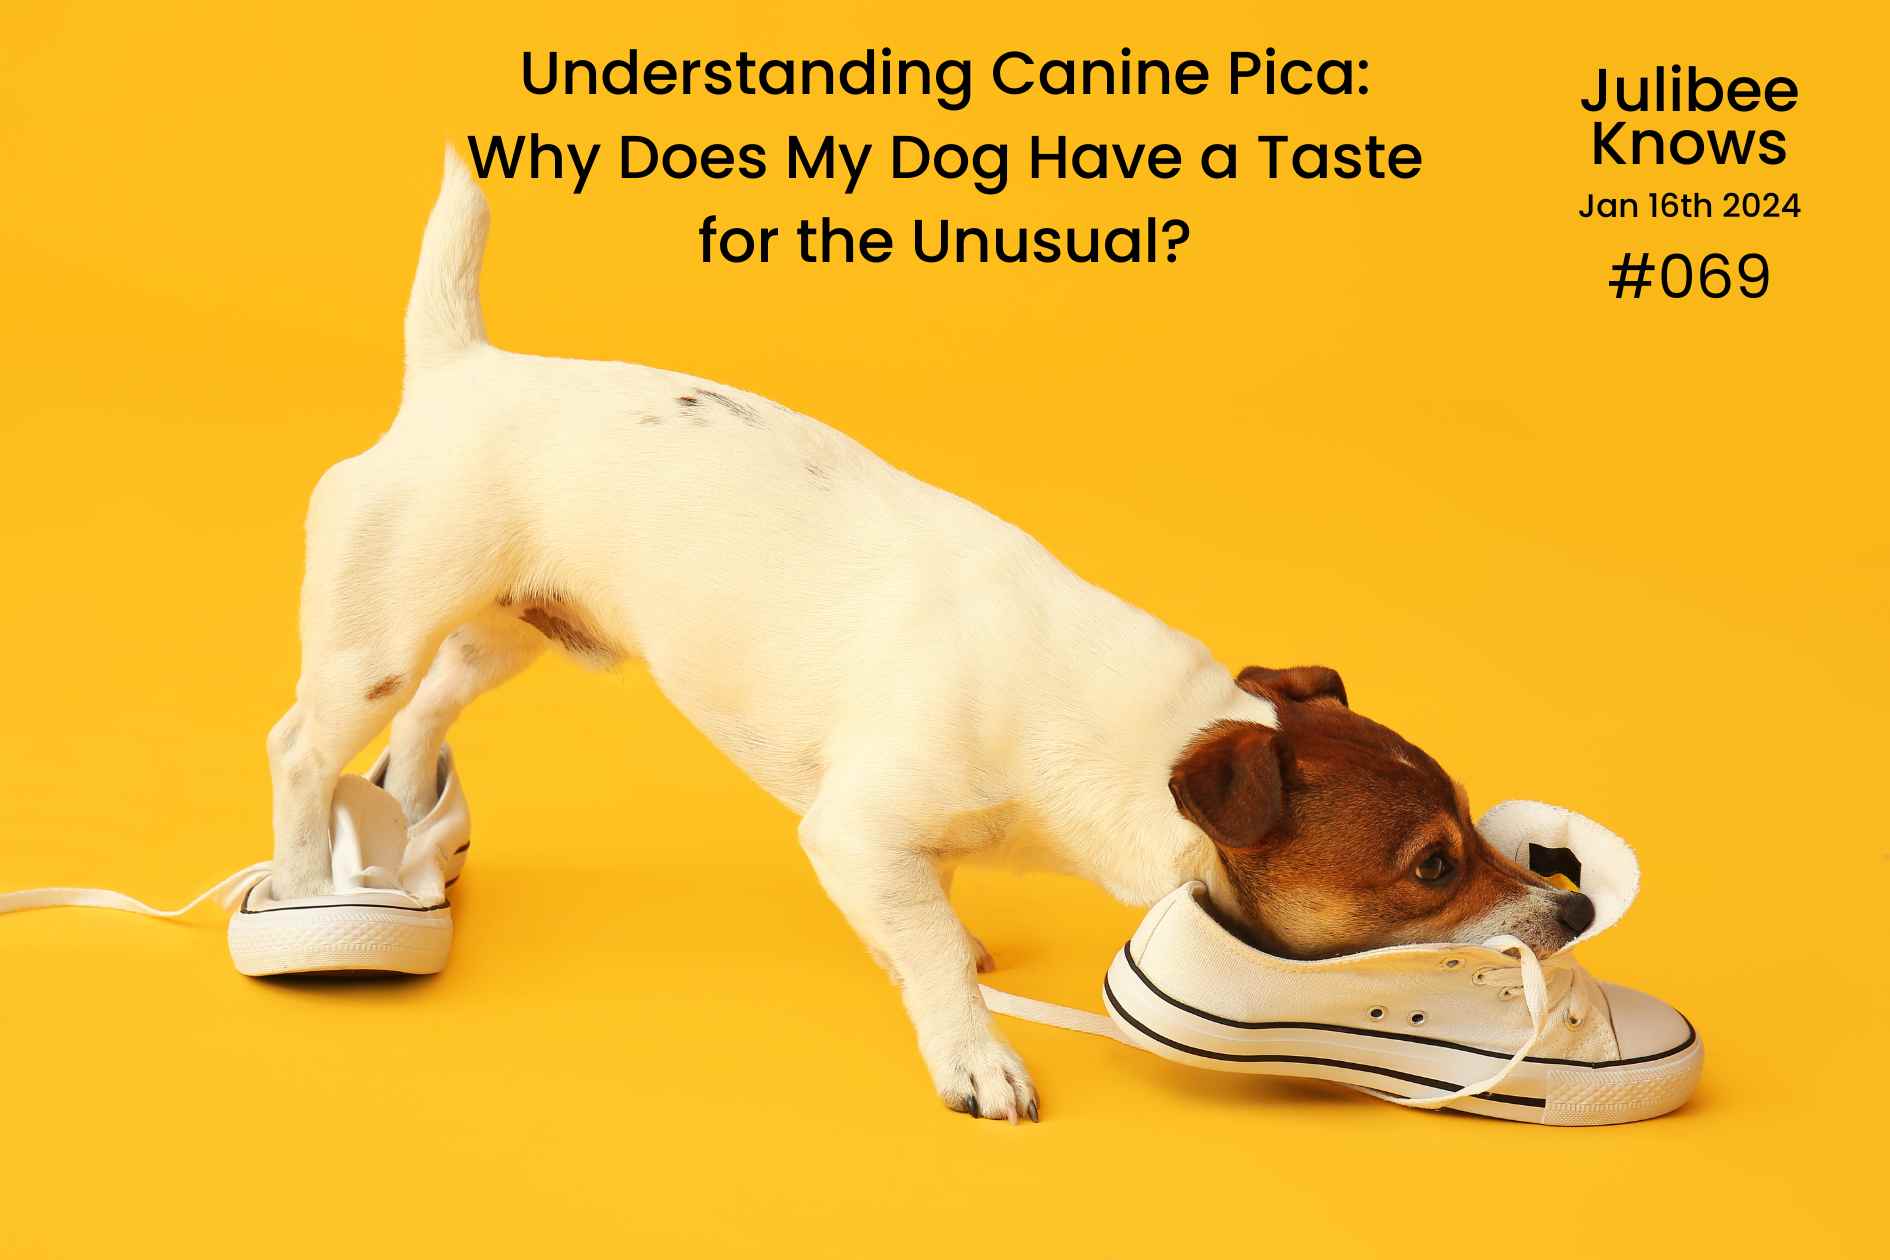 Understanding Canine Pica: Why Does My Dog Eat Weird Stuff Like Wall Plaster and Slippers?